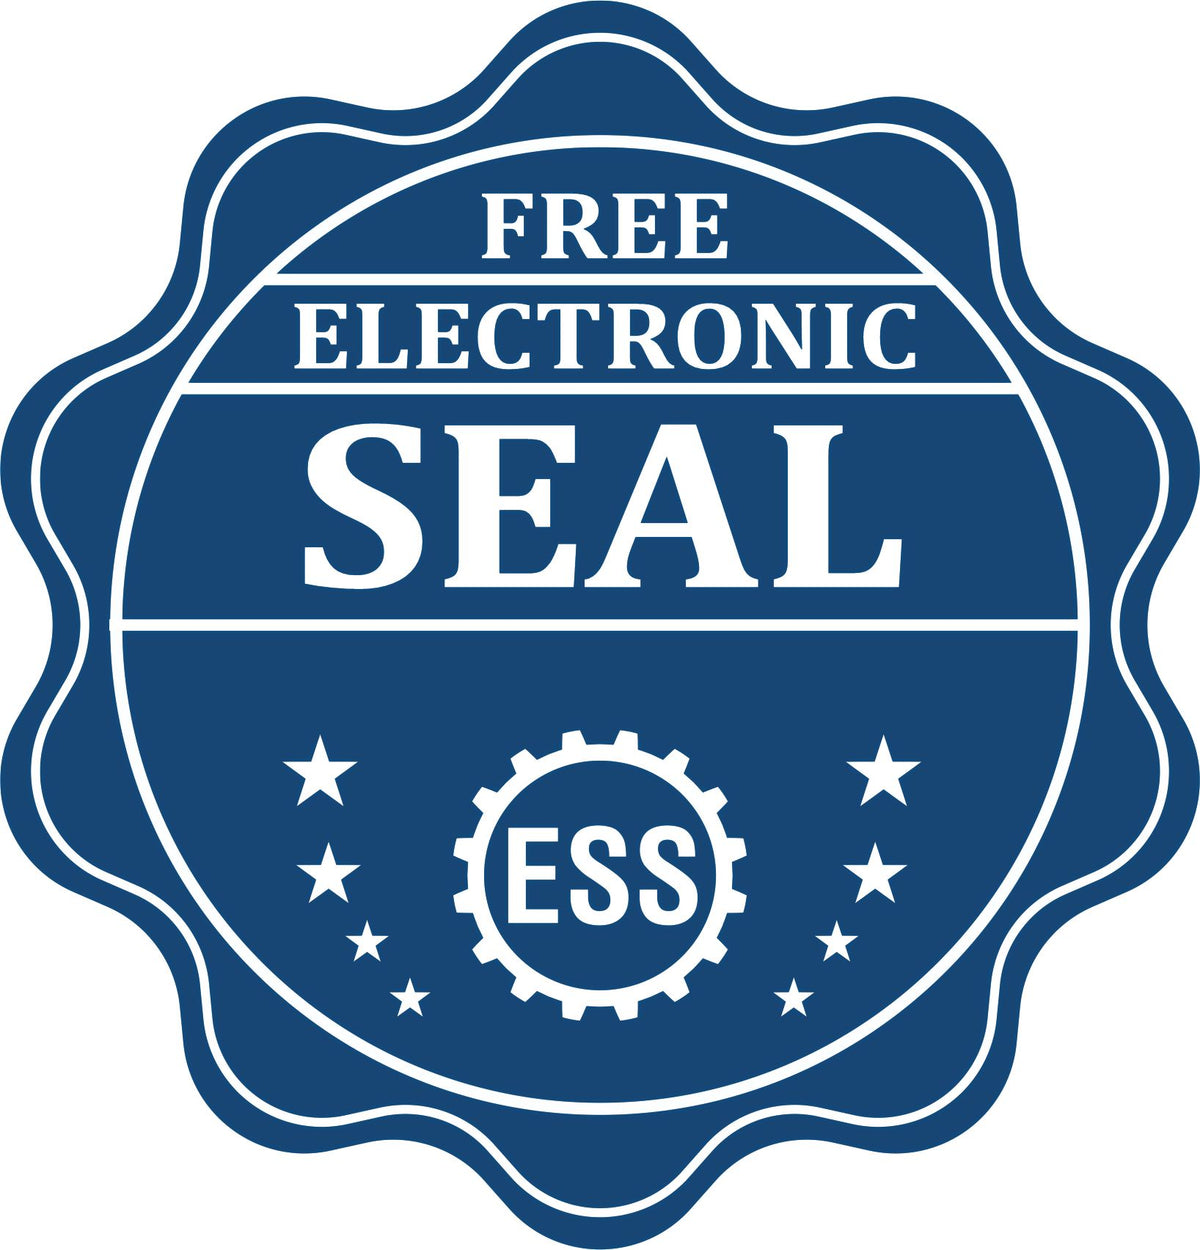 A badge showing a free electronic seal for the PSI Idaho Notary Stamp with stars and the ESS gear on the emblem.